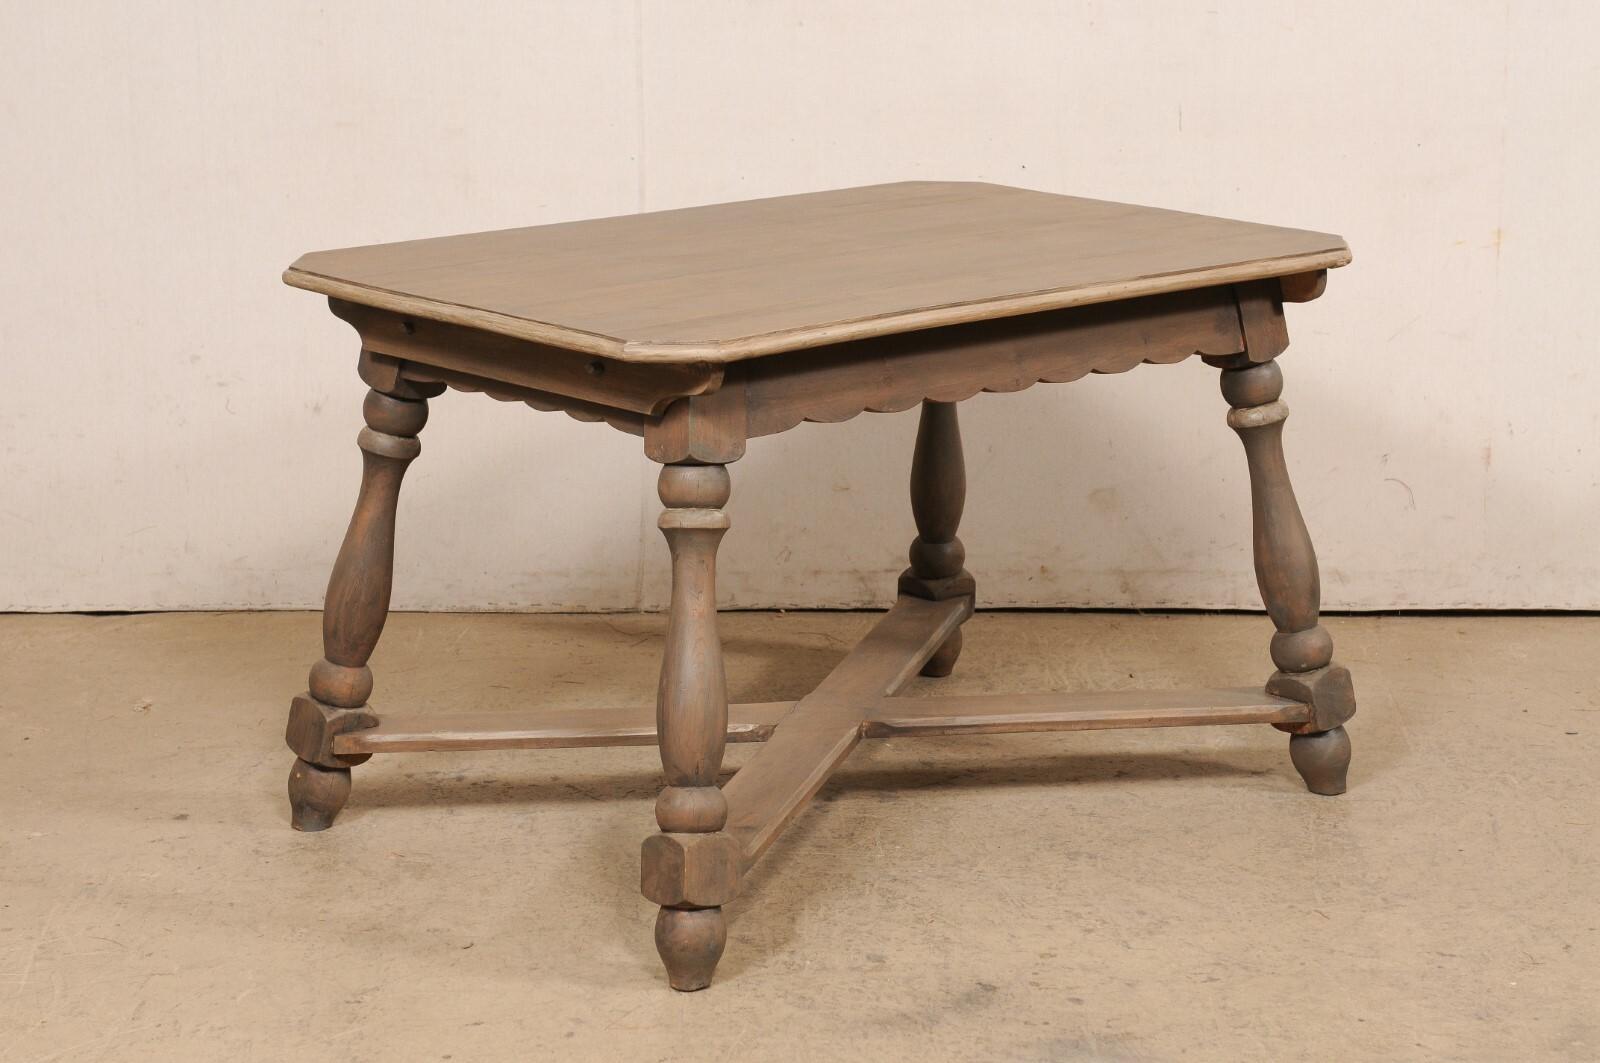 European Wooden Table w/Scalloped Apron, Nicely Turned Legs & X-Stretcher In Good Condition For Sale In Atlanta, GA